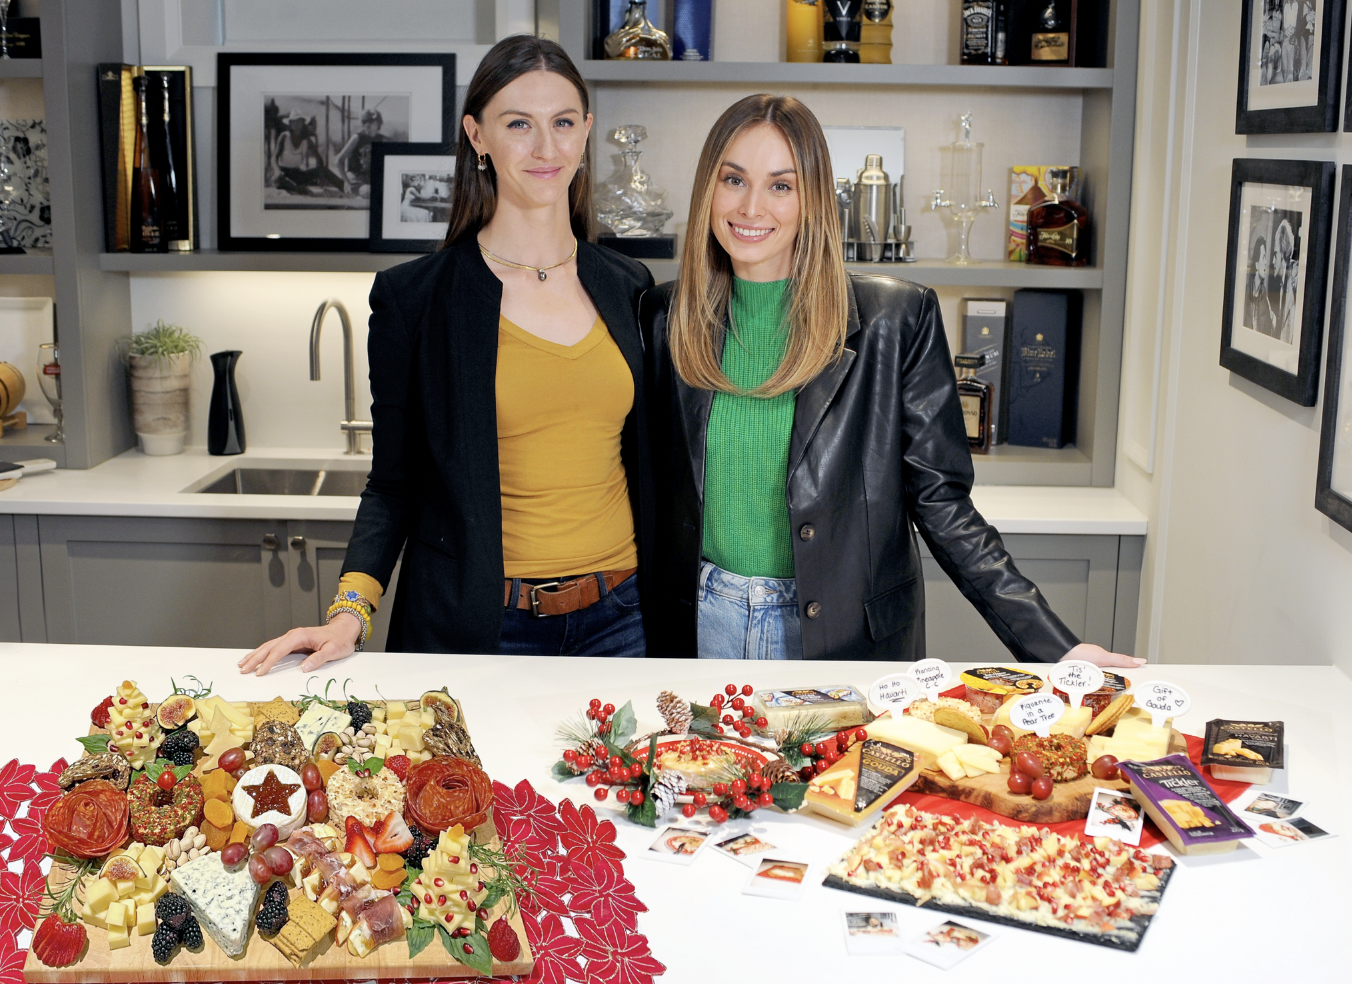 Two women standing next to a table with food on it

Description automatically generated with medium confidence